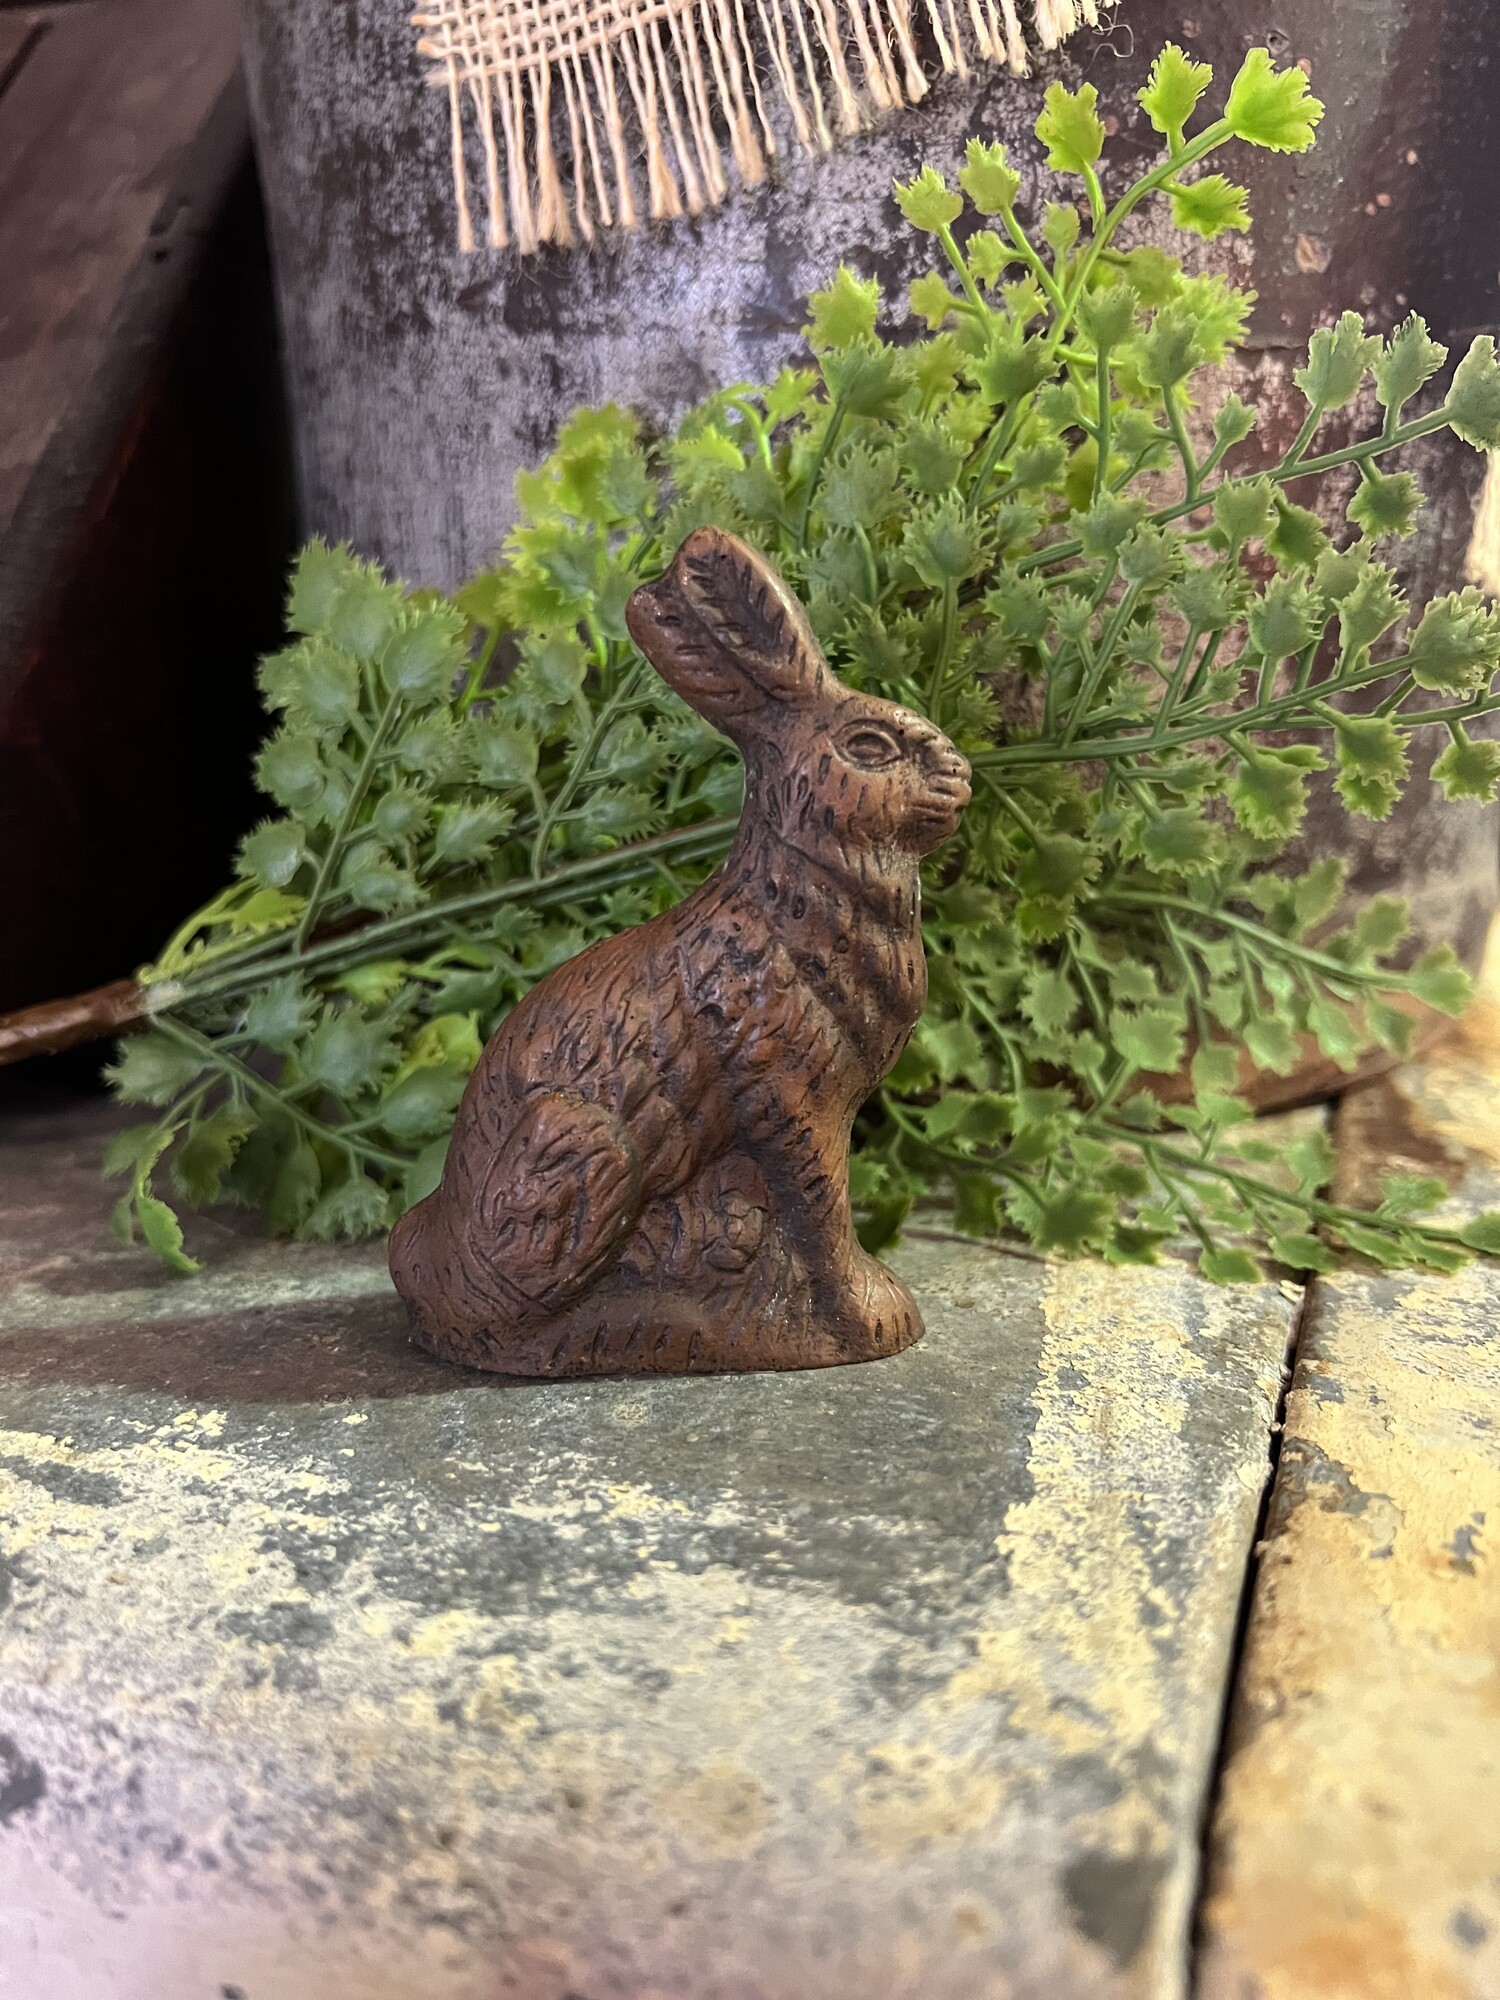 Adorable Chocolate Bunny is the perfect addition to your Easter decor. Bunny is made of resin and is double sided and has the appearance of a real chocolate bunny. Measures 3.25 inches in height